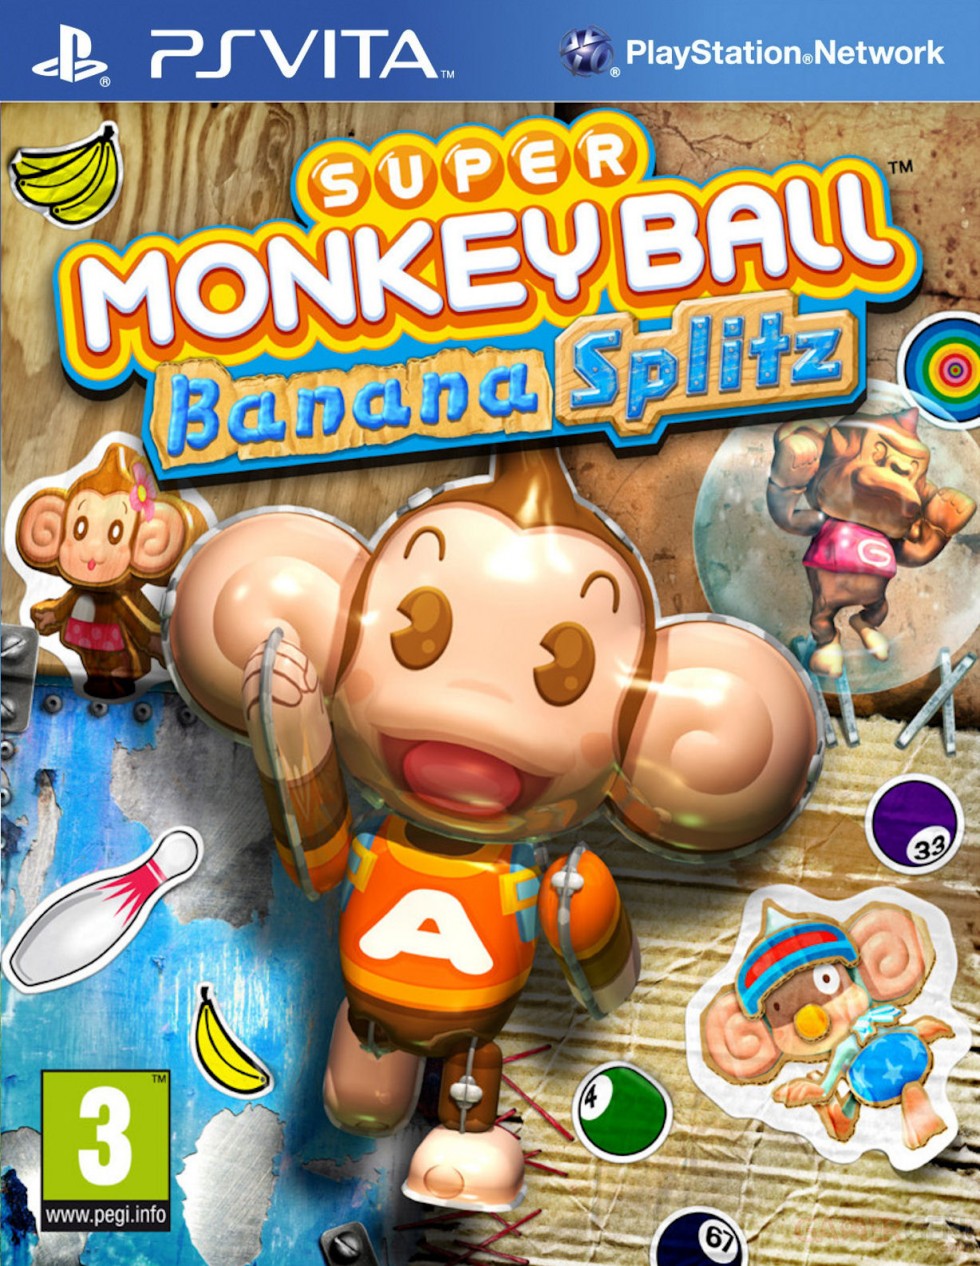 Super Monkey Ball jaquette cover 03.05.2012